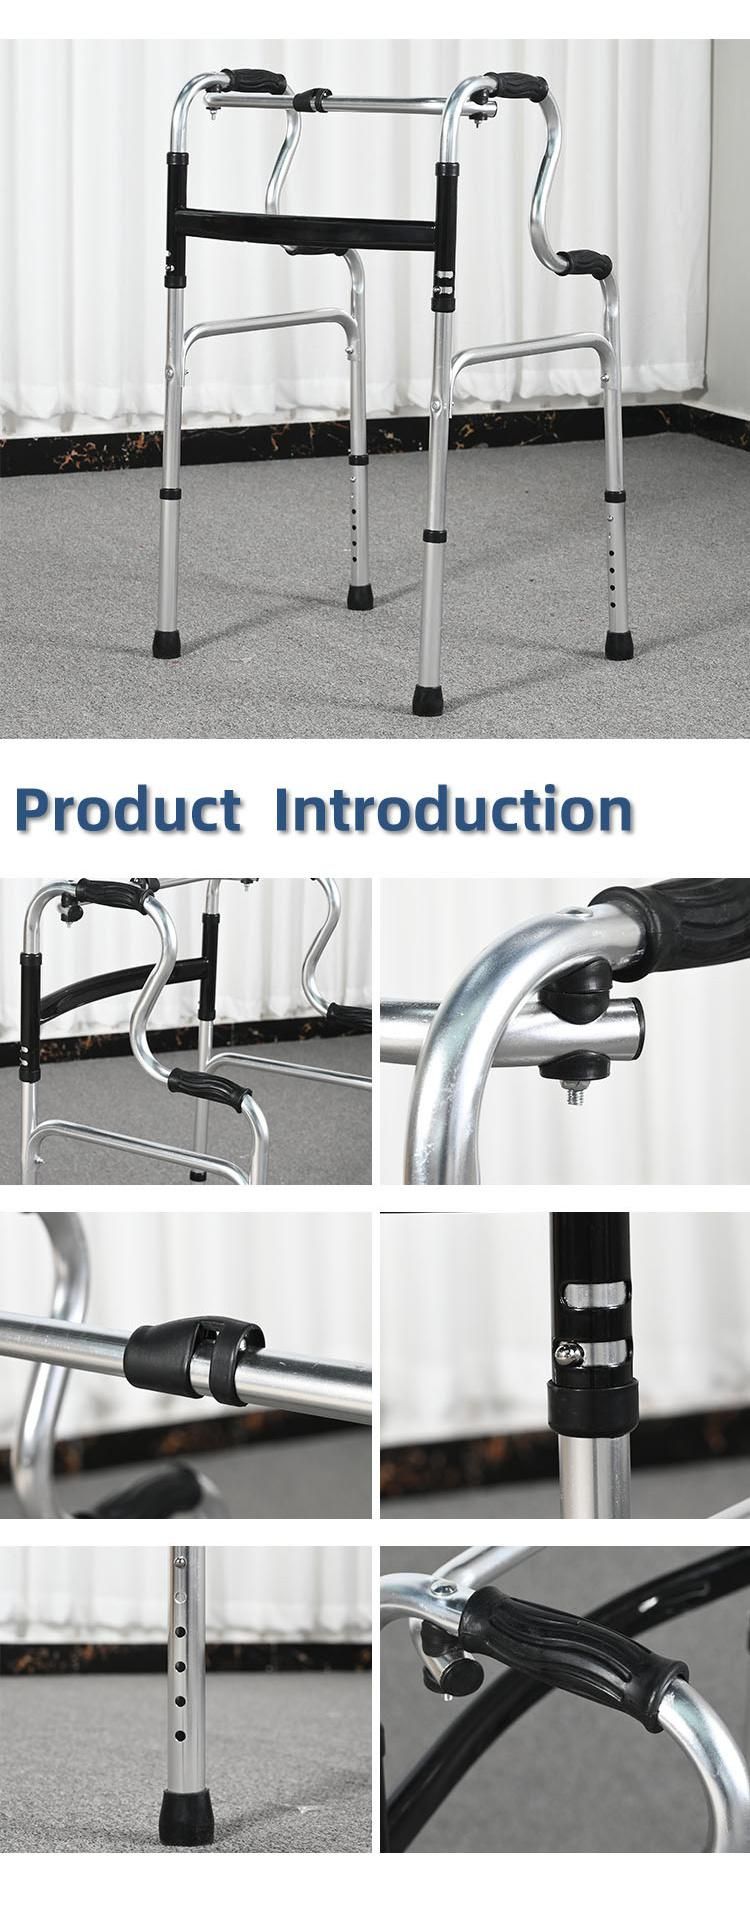 Shinebright High Quality Cost-Effective Aluminum Frame Walker Walking Aids for Disabled